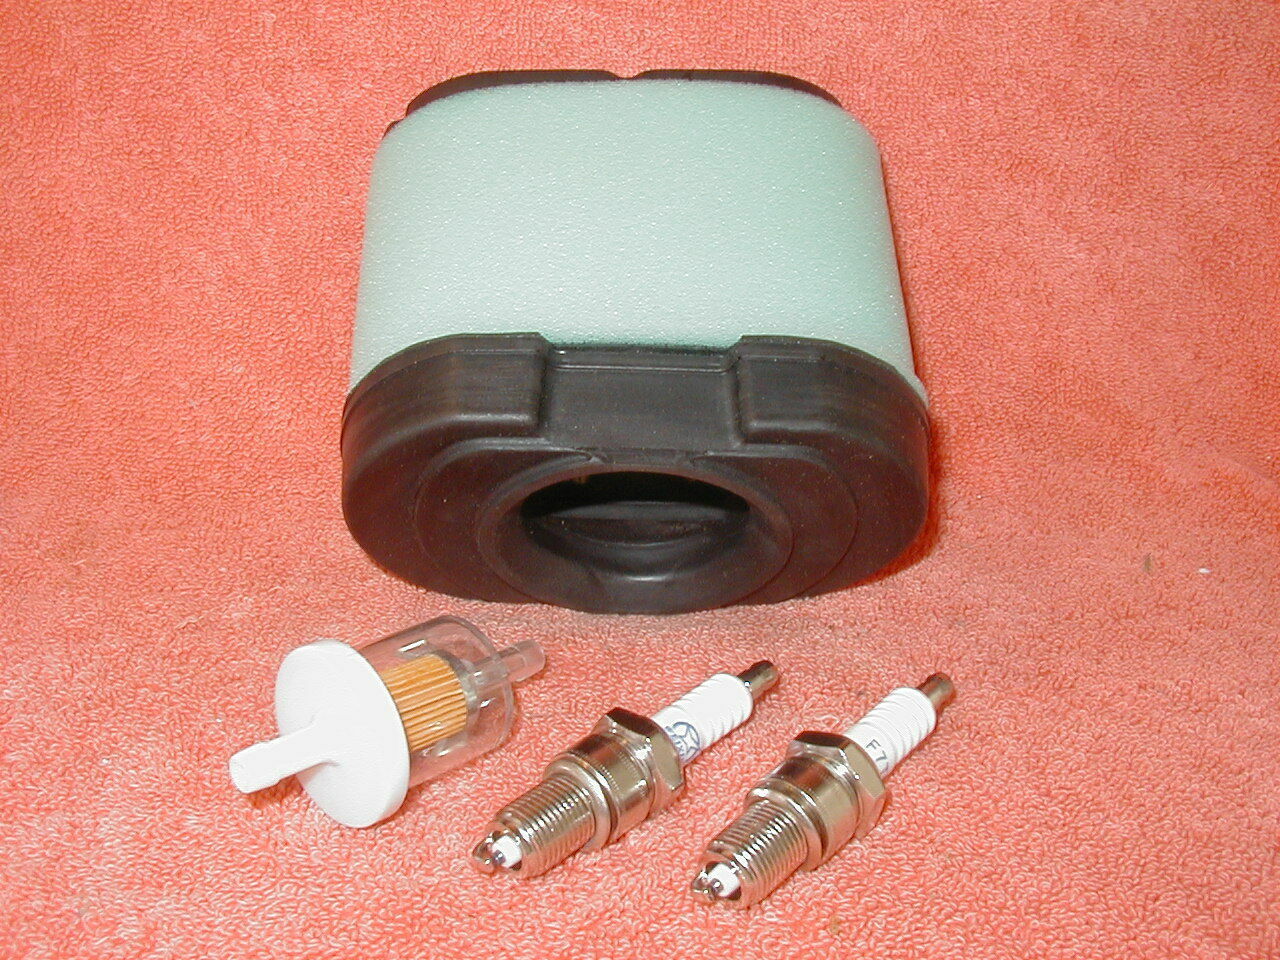 Air, Fuel Filters for Briggs & Stratton 26 27 HP  792105 792303  44H777 44K777 - $12.23